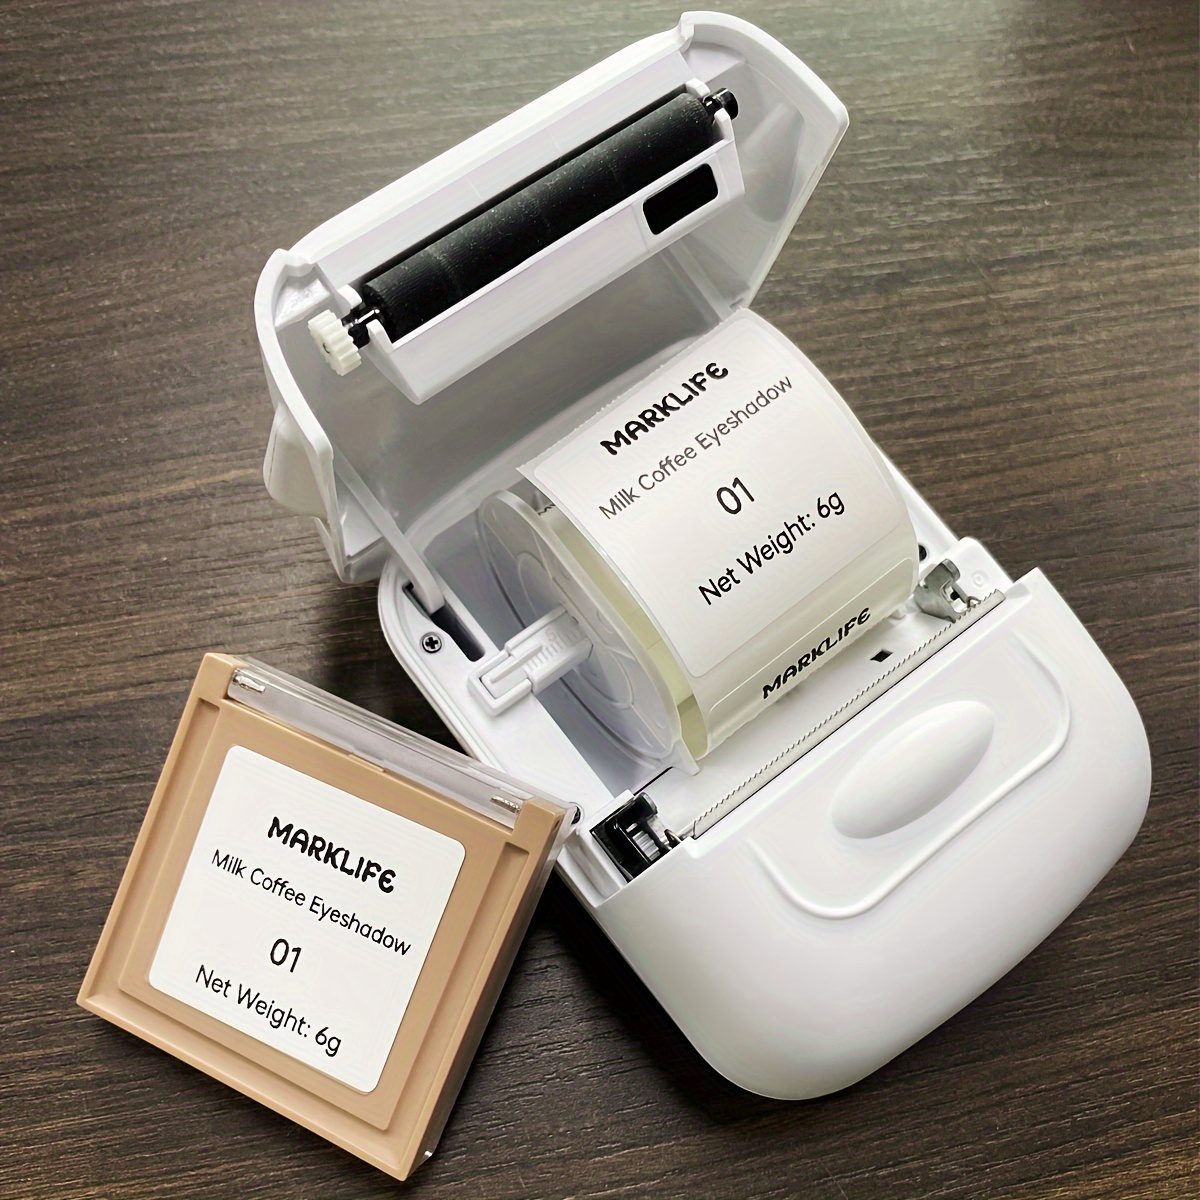 Marklife Thermal Label for P50 Portable Printer Clothing Hangtags Price Tag  Barcode Lable Self-adhesive White Label Paper - AliExpress